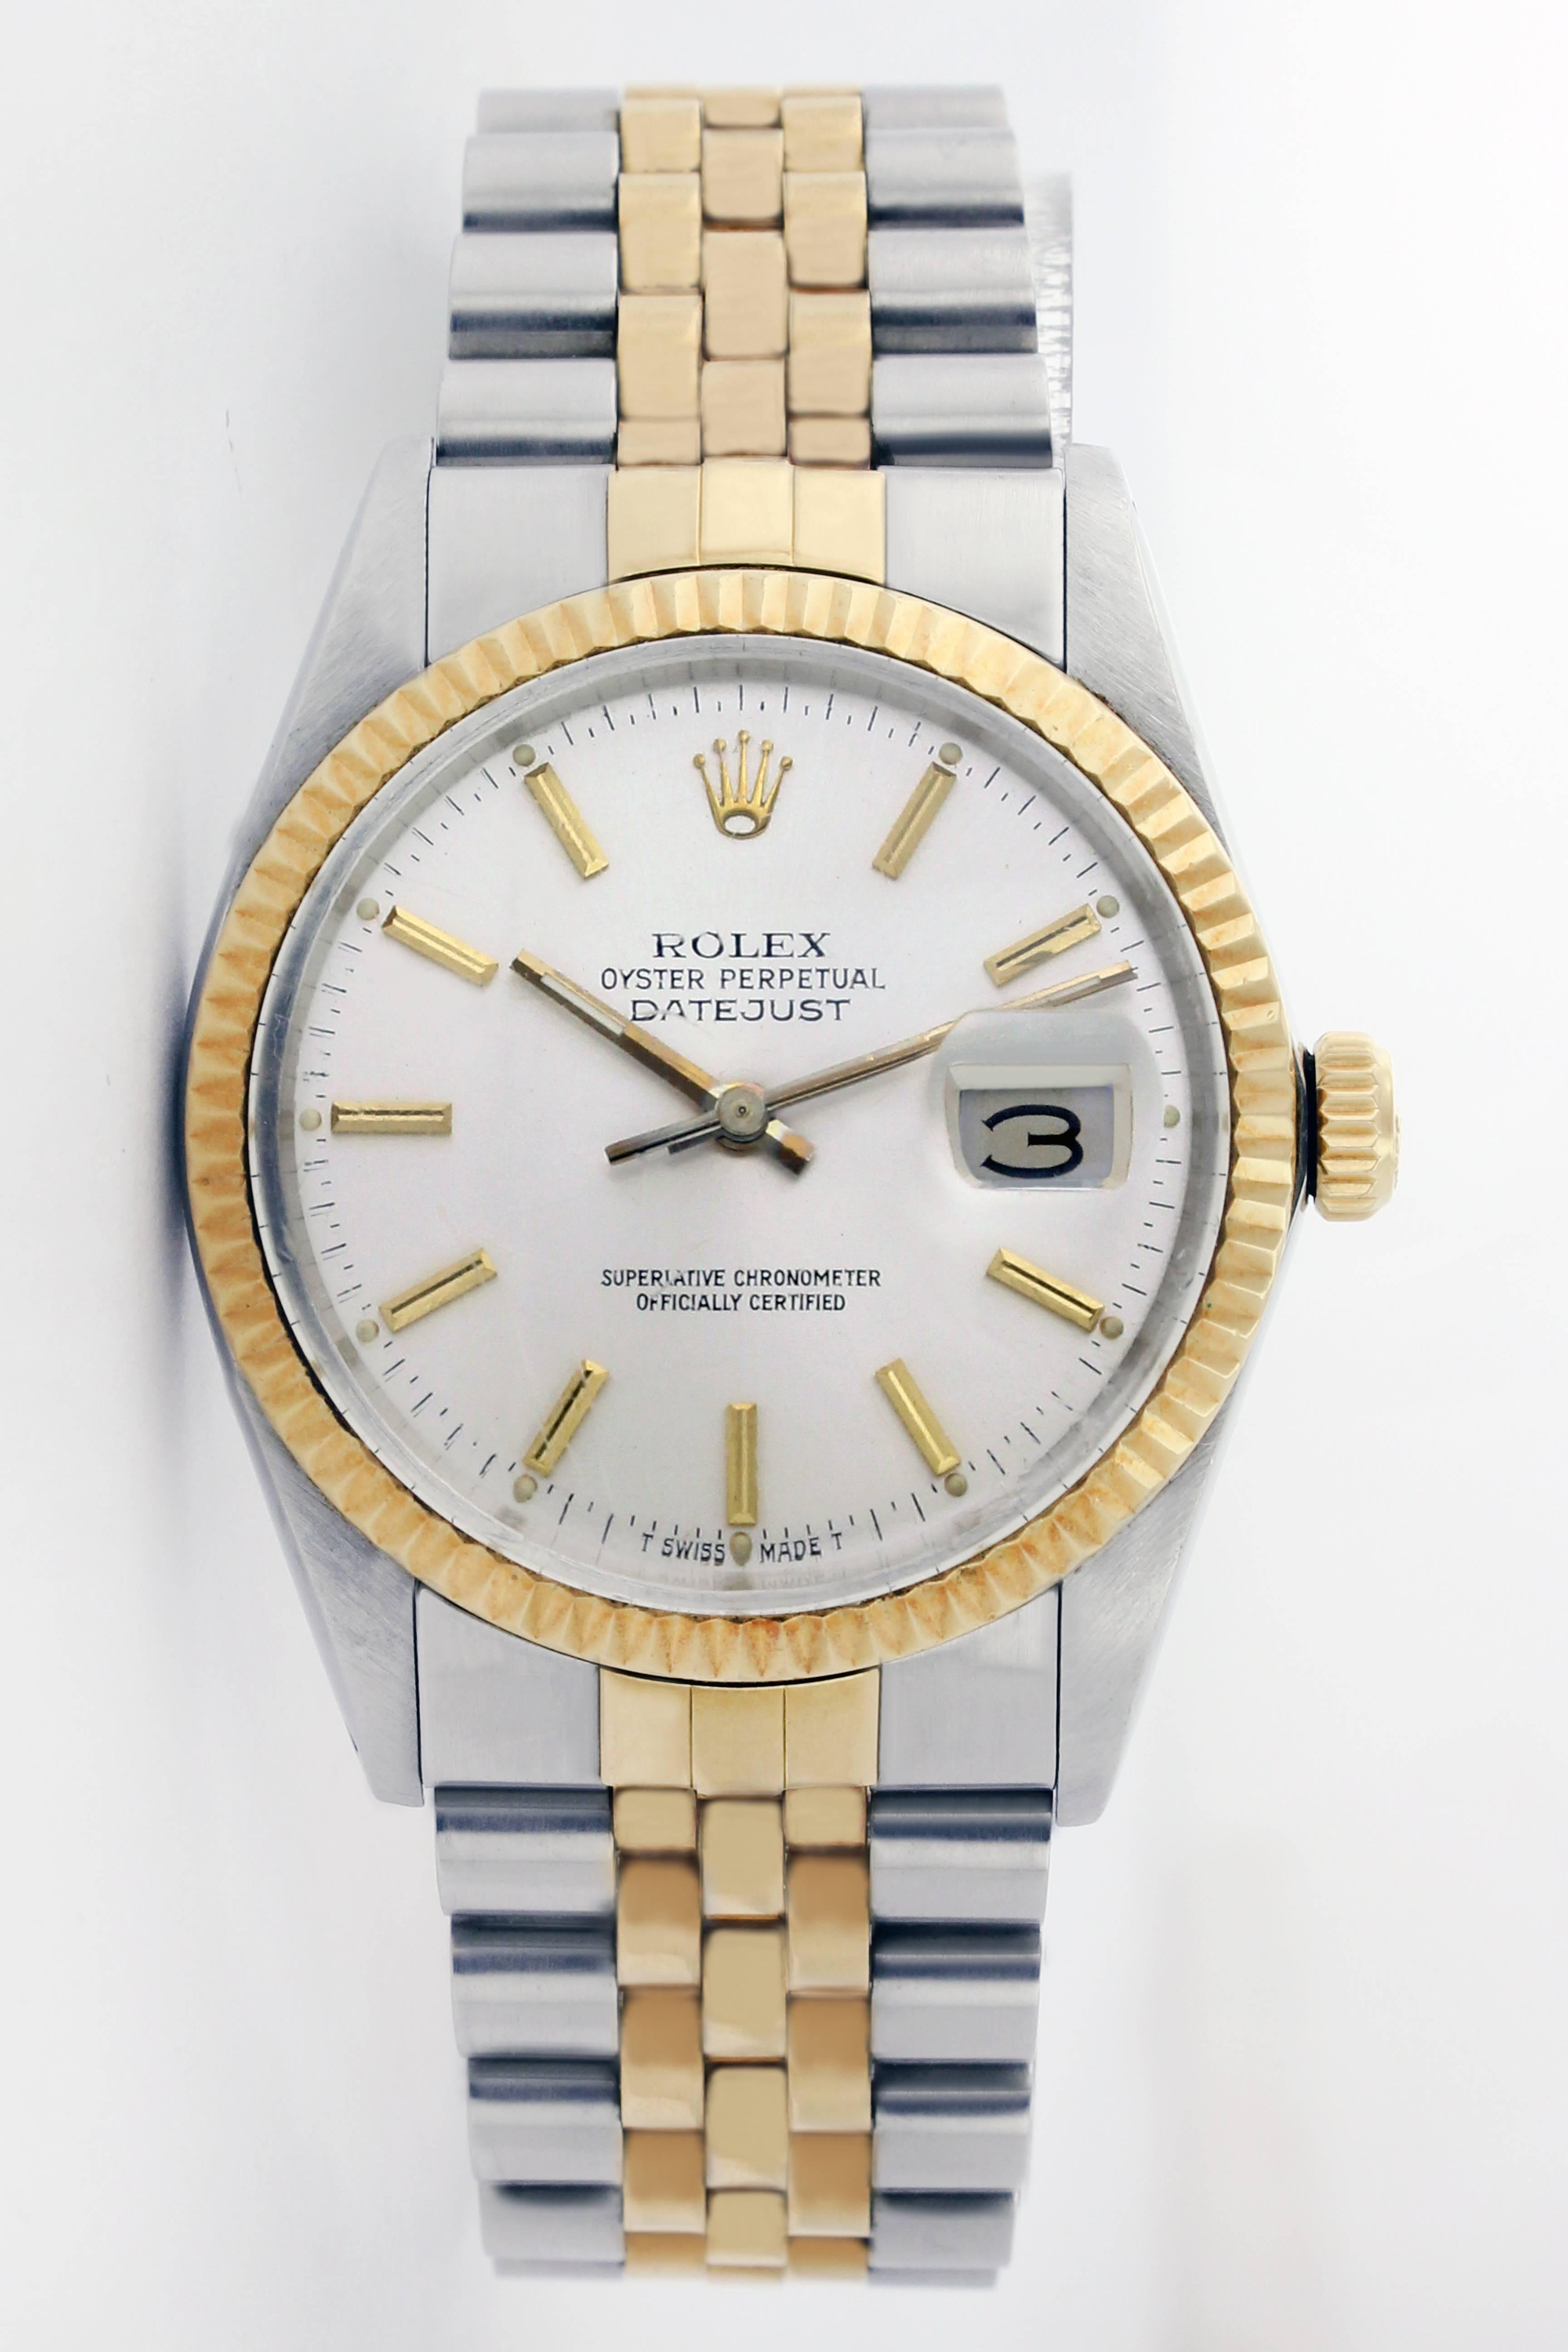 Rolex yellow gold Stainless Steel Datejust Automatic Wristwatch Ref 16013 For Sale 7